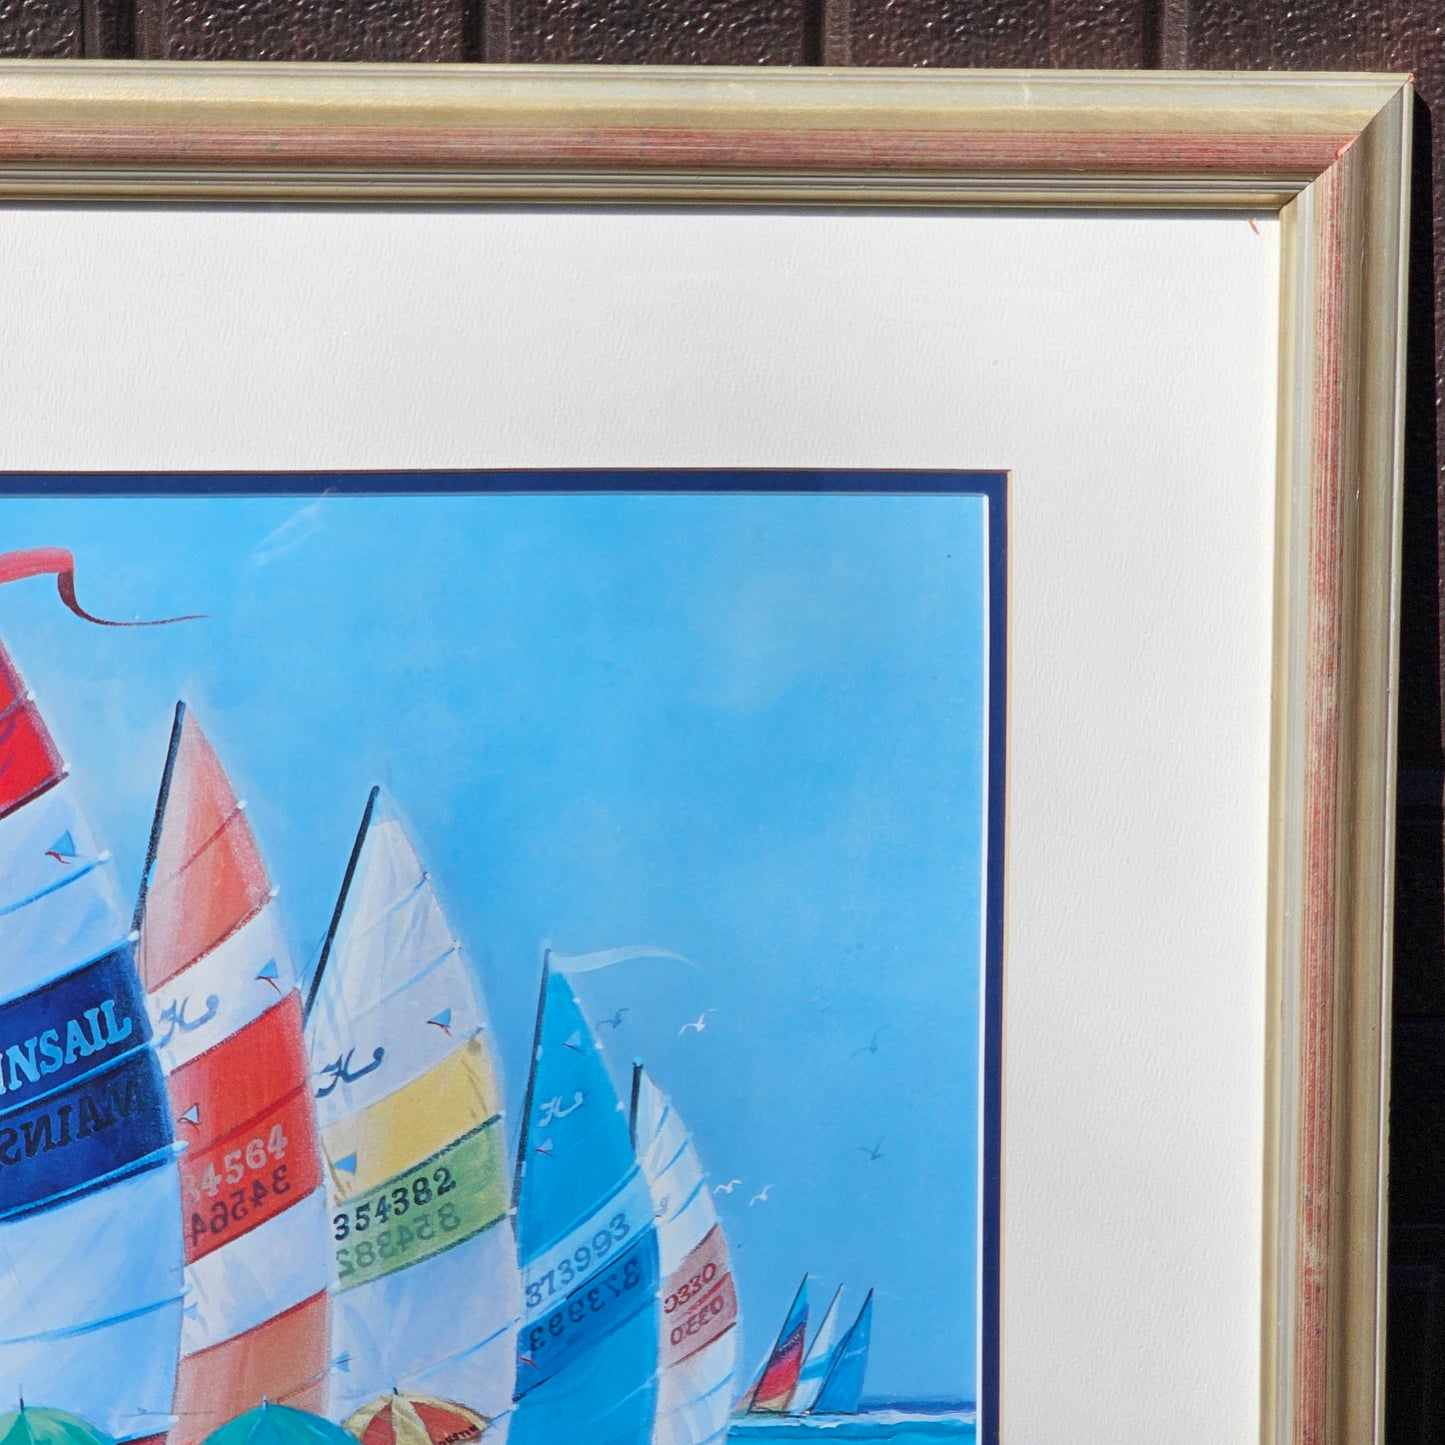 Richard E. Williams Artwork with Sailboats - Limited Edition Lithograph